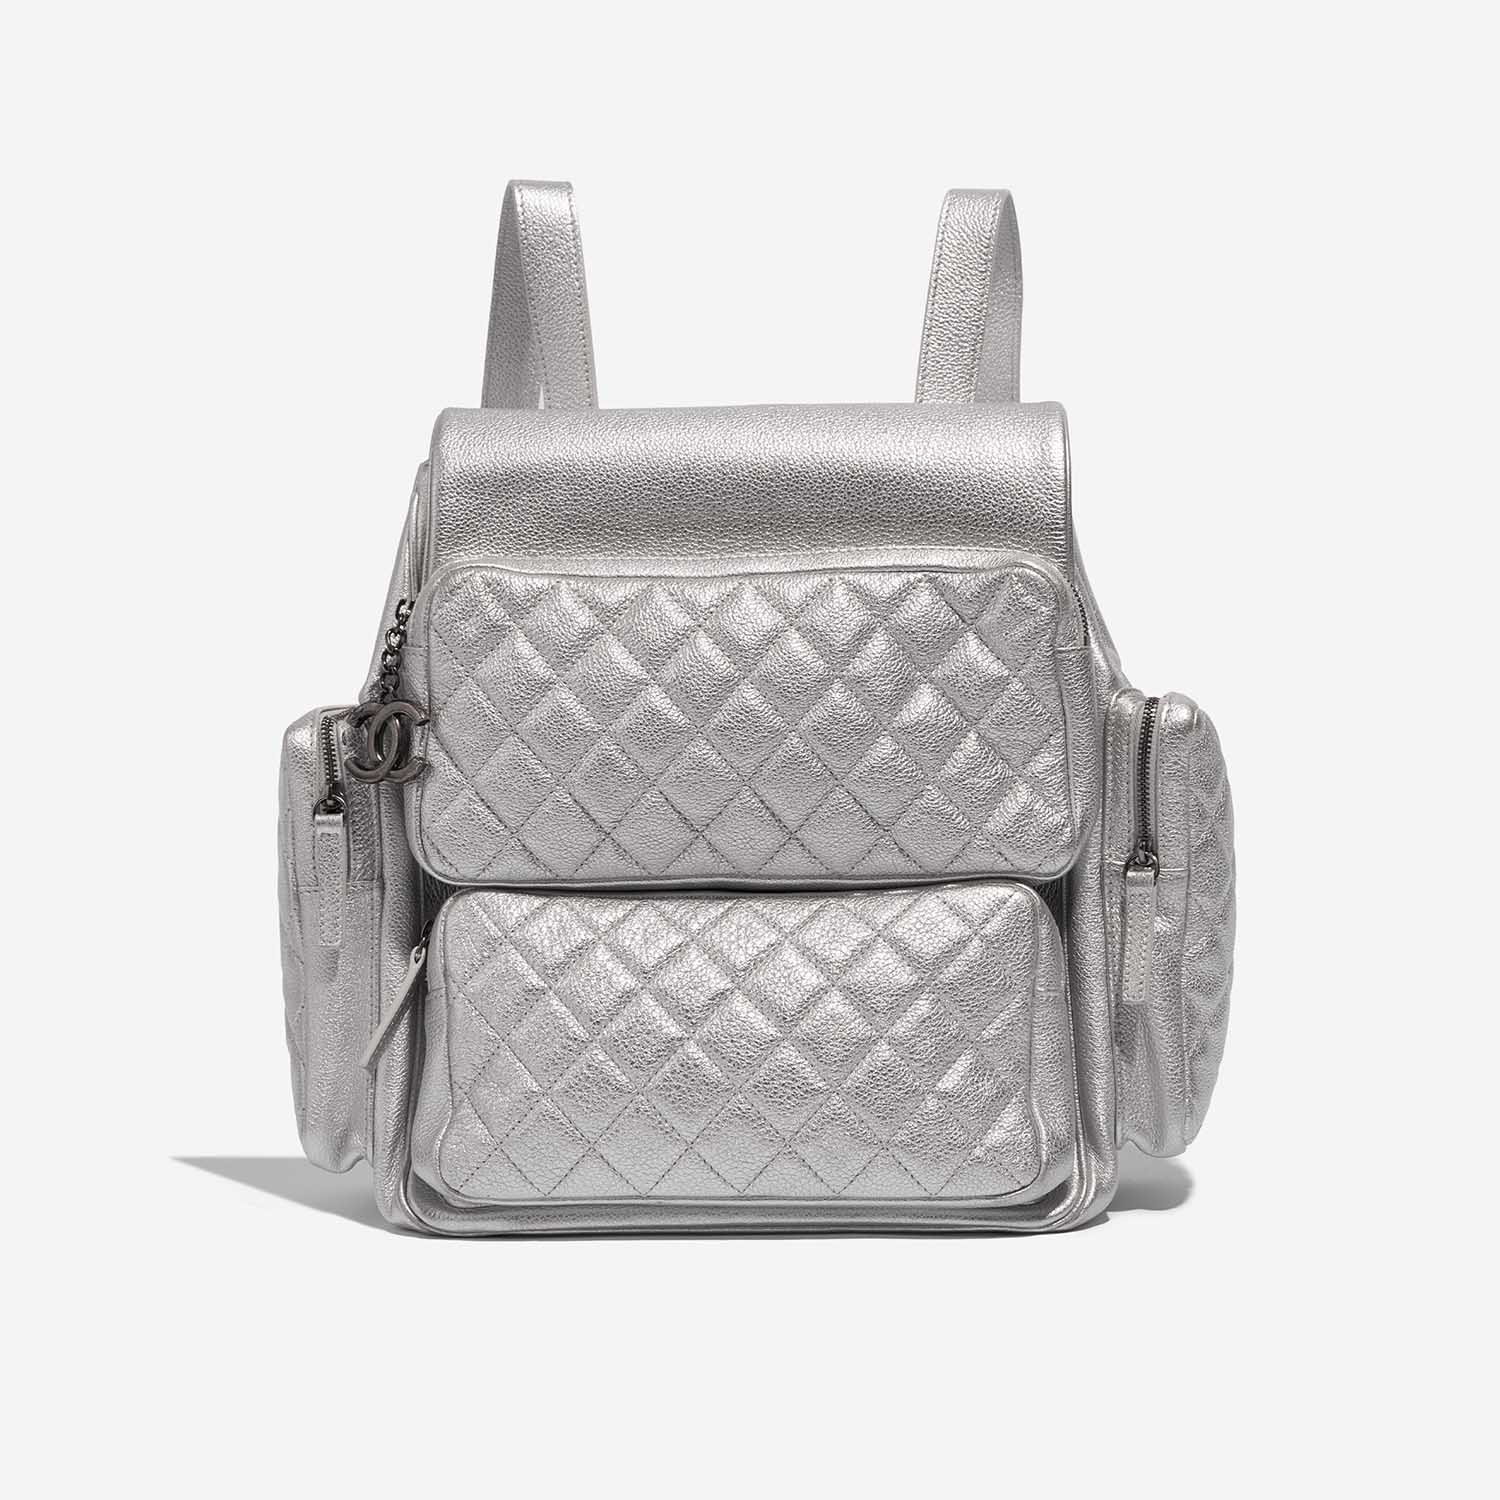 Pre-Owned Authenticated Chanel Casual Rock Timeless Backpack